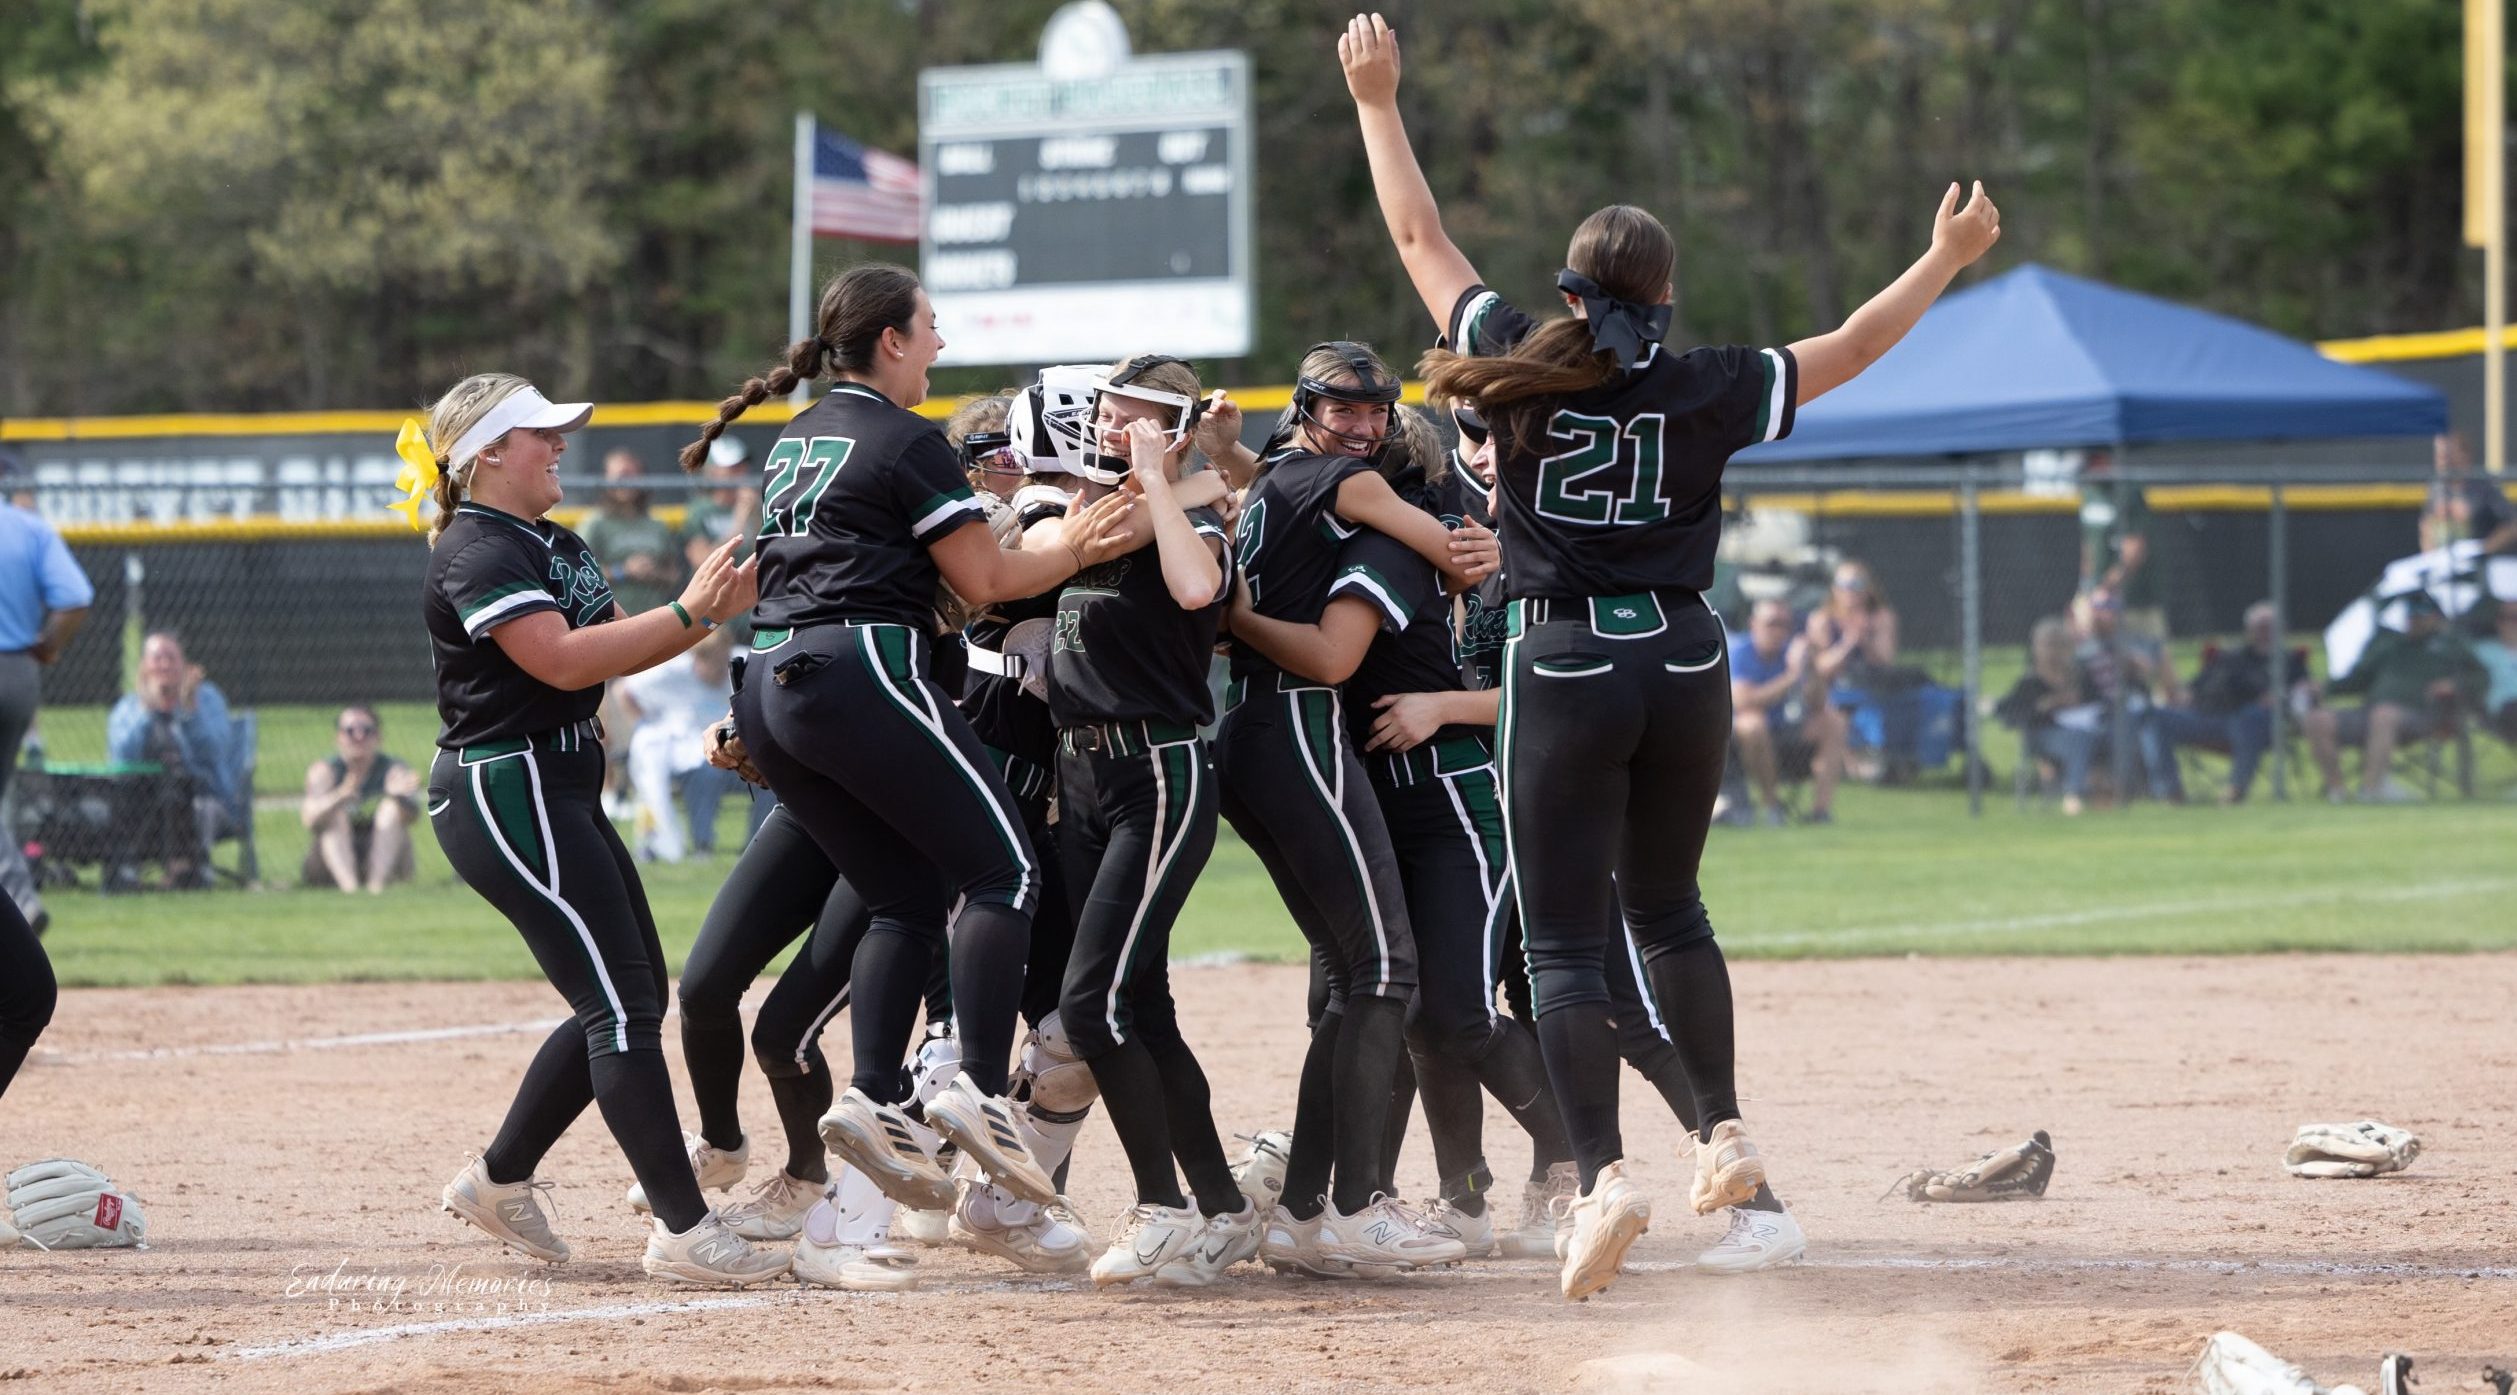 Reeths-Puffer pitches its way past Ravenna, takes home GMAA Tier I city softball championship